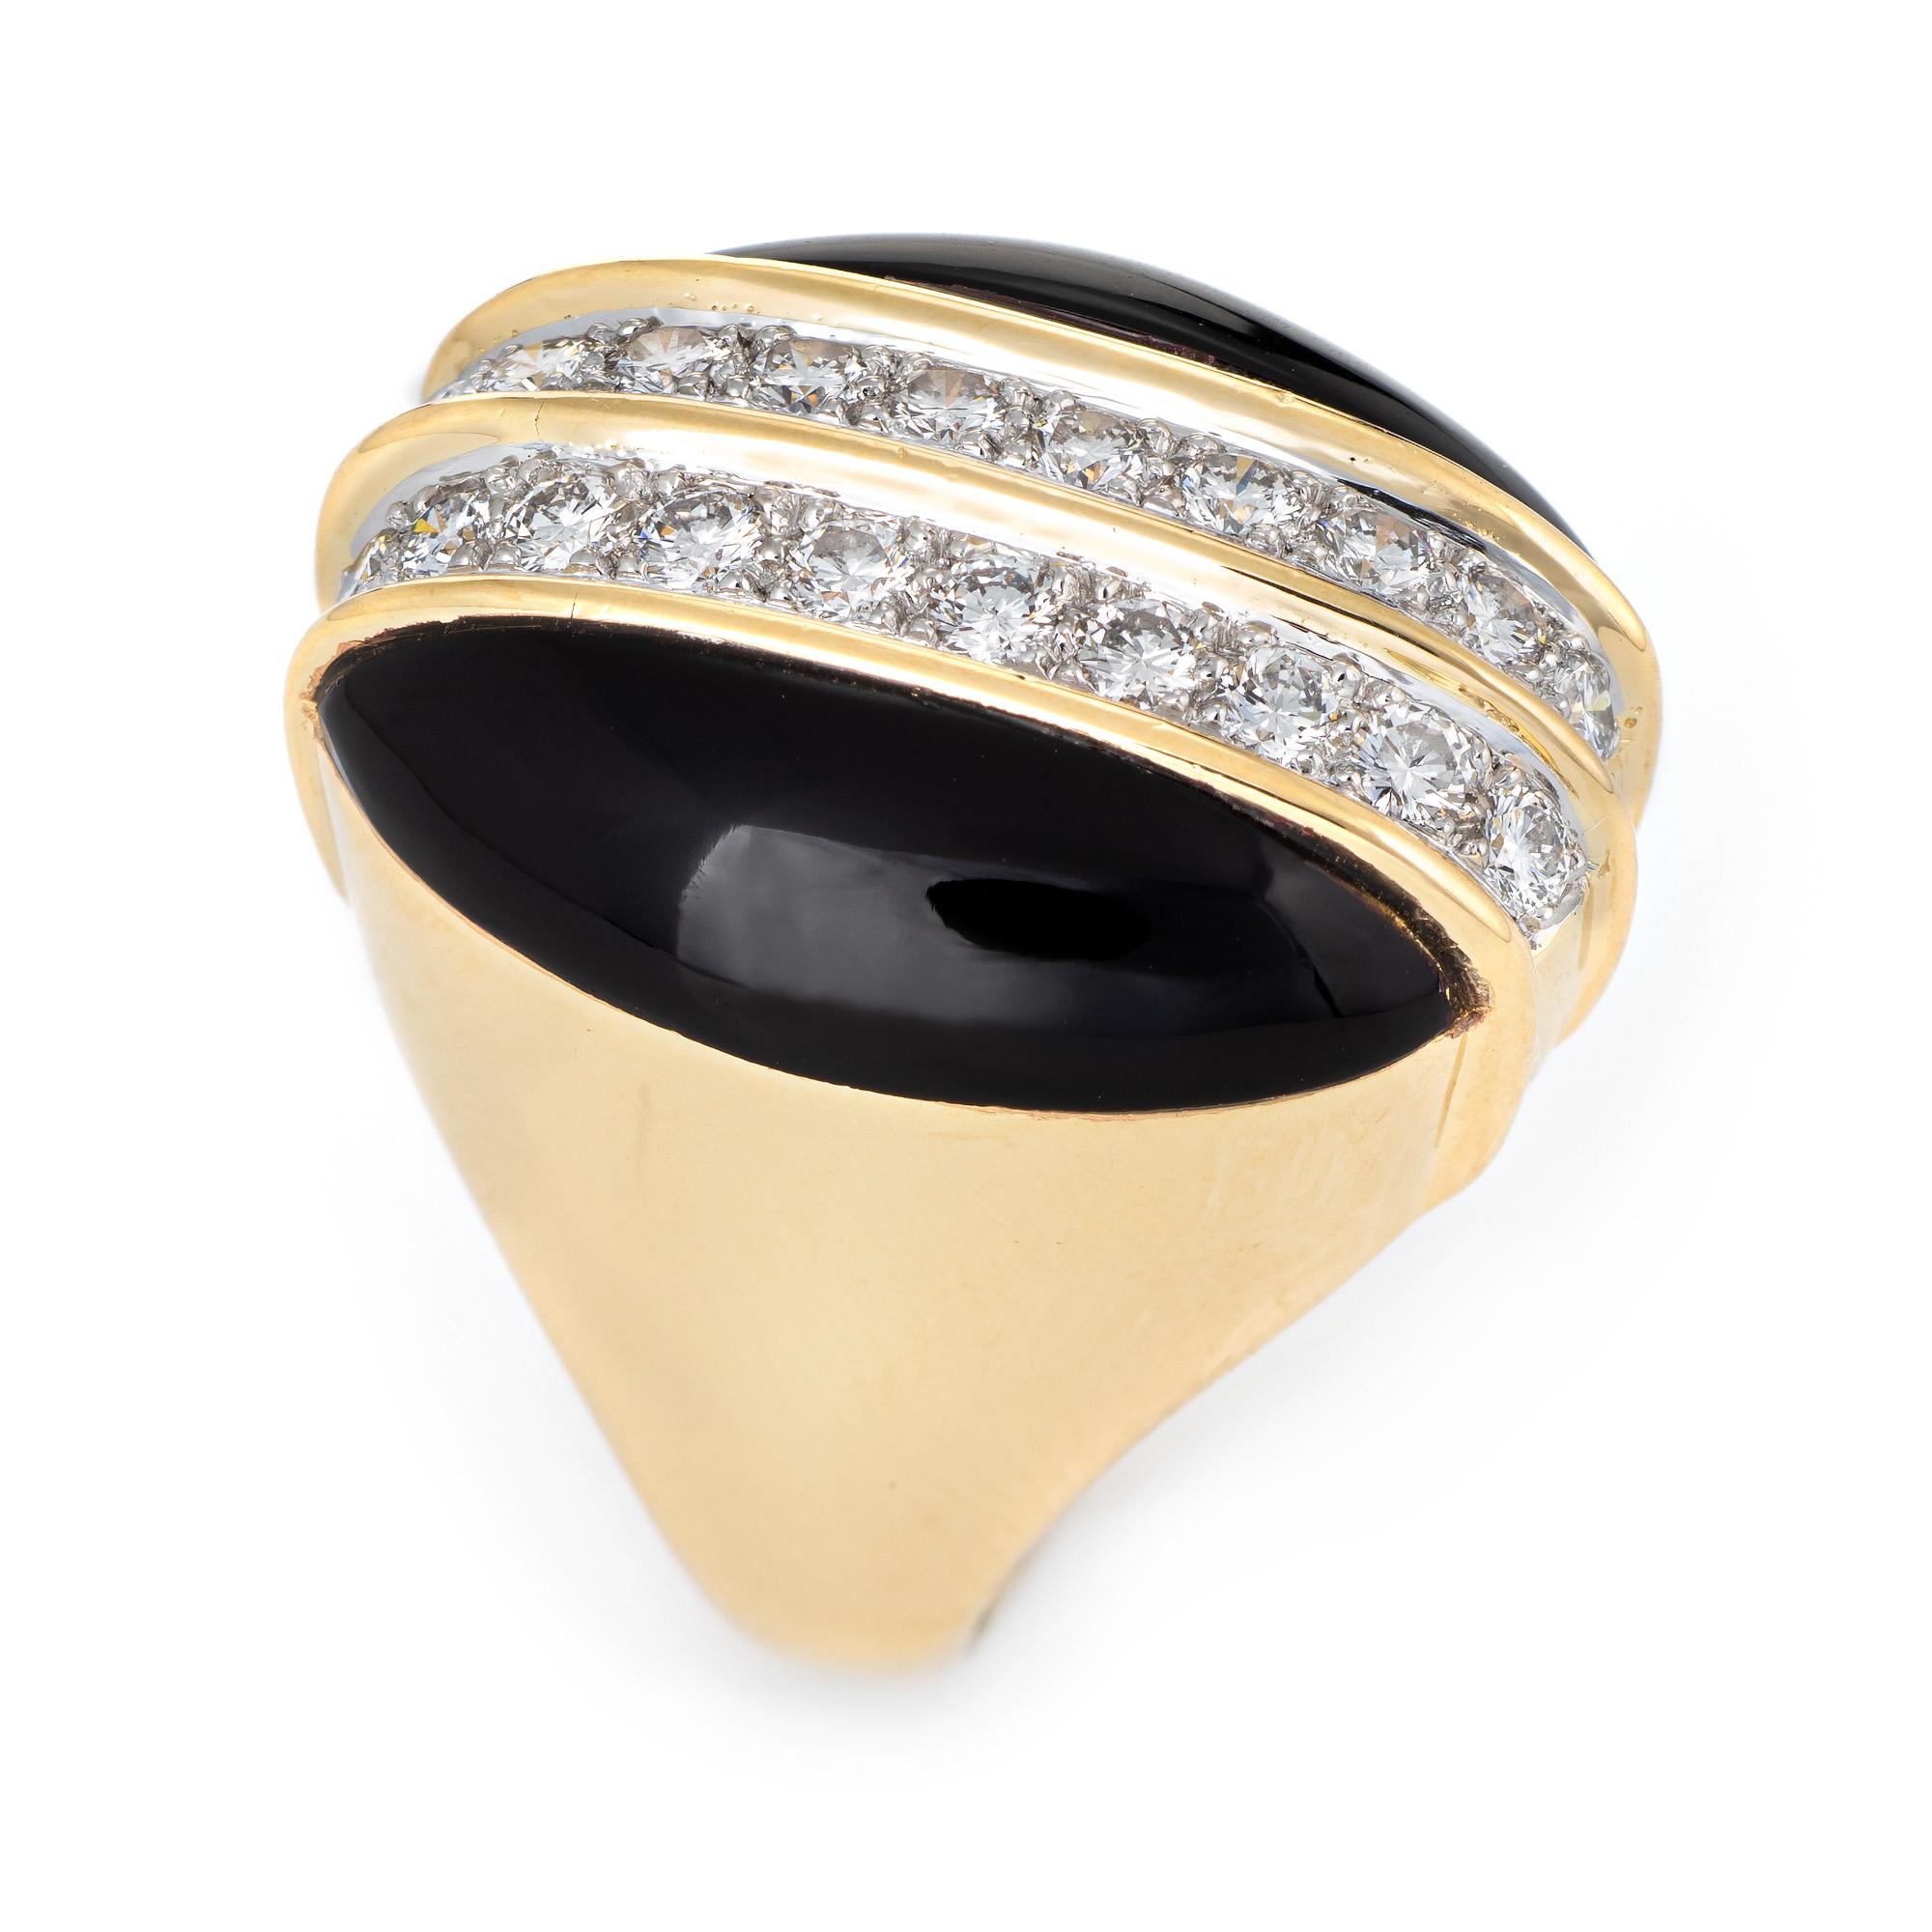 Stylish vintage onyx & diamond cocktail ring (circa 1960s to 1970s) crafted in 18 karat yellow gold. 

Two pieces of onyx each measure 20mm x 6mm. 20 diamonds are estimated at 0.04 carats each and total an estimated 0.80 carats (estimated at G-H